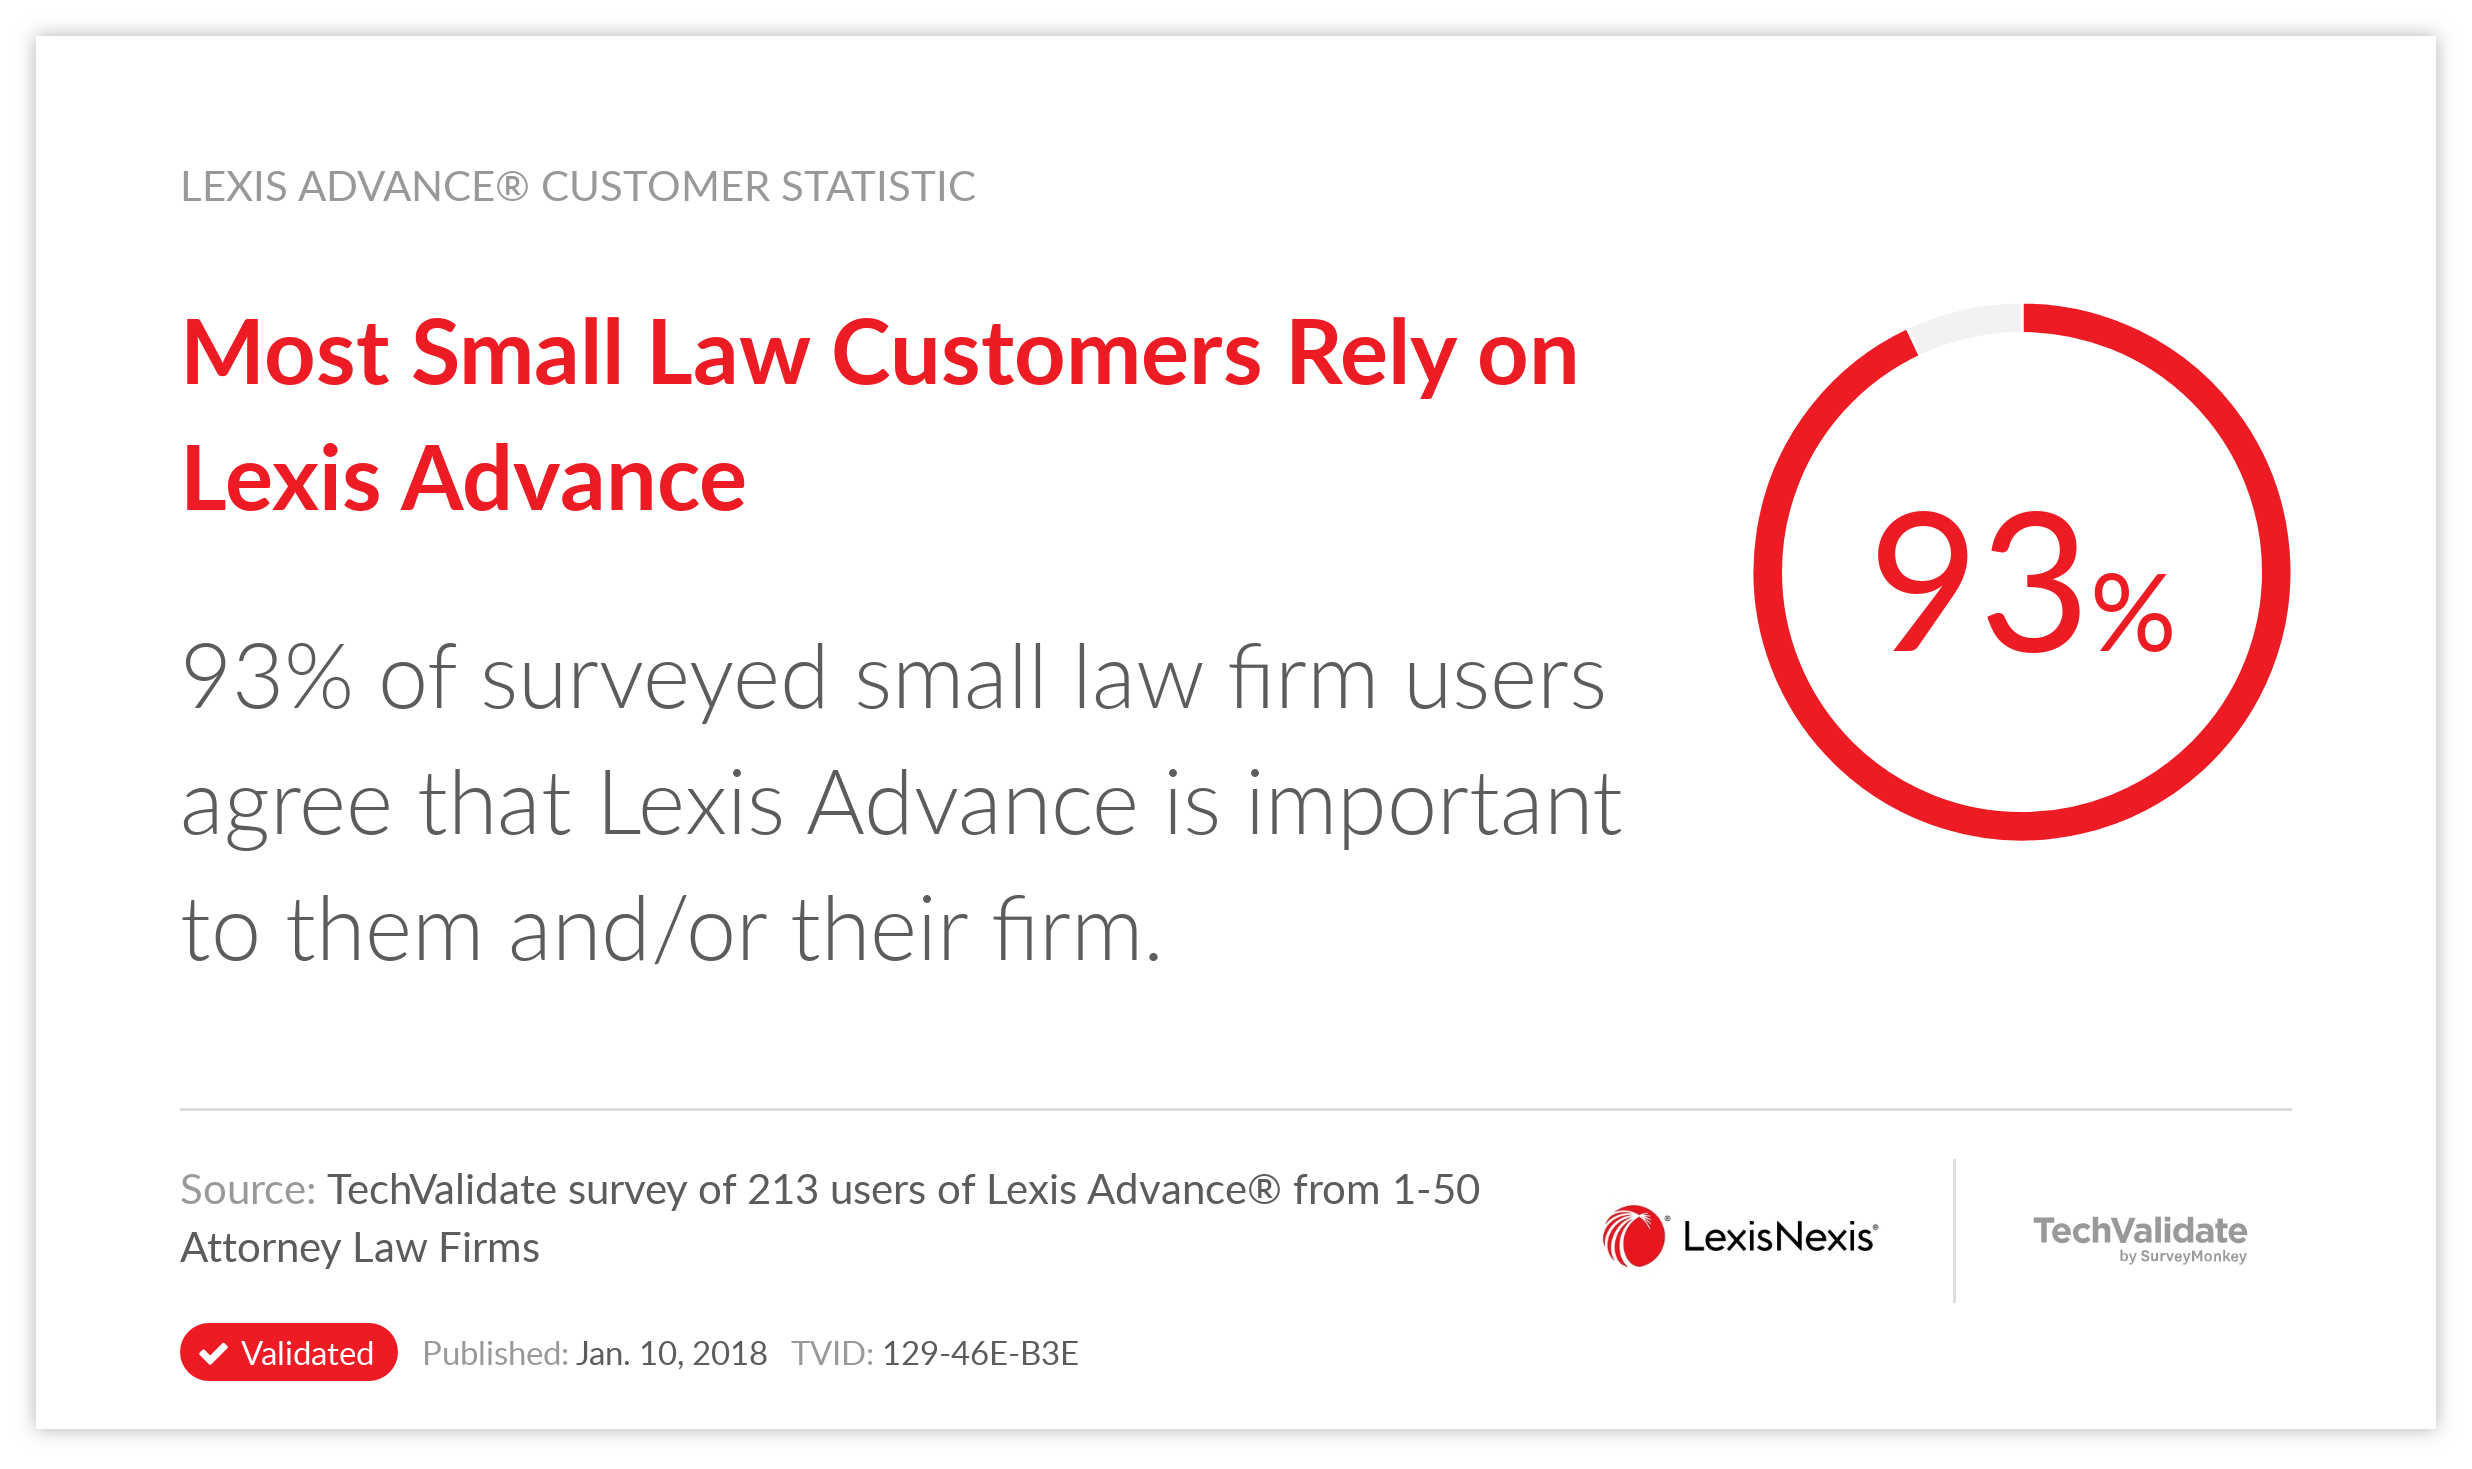 Most Small Law Customers Rely on Lexis Advance